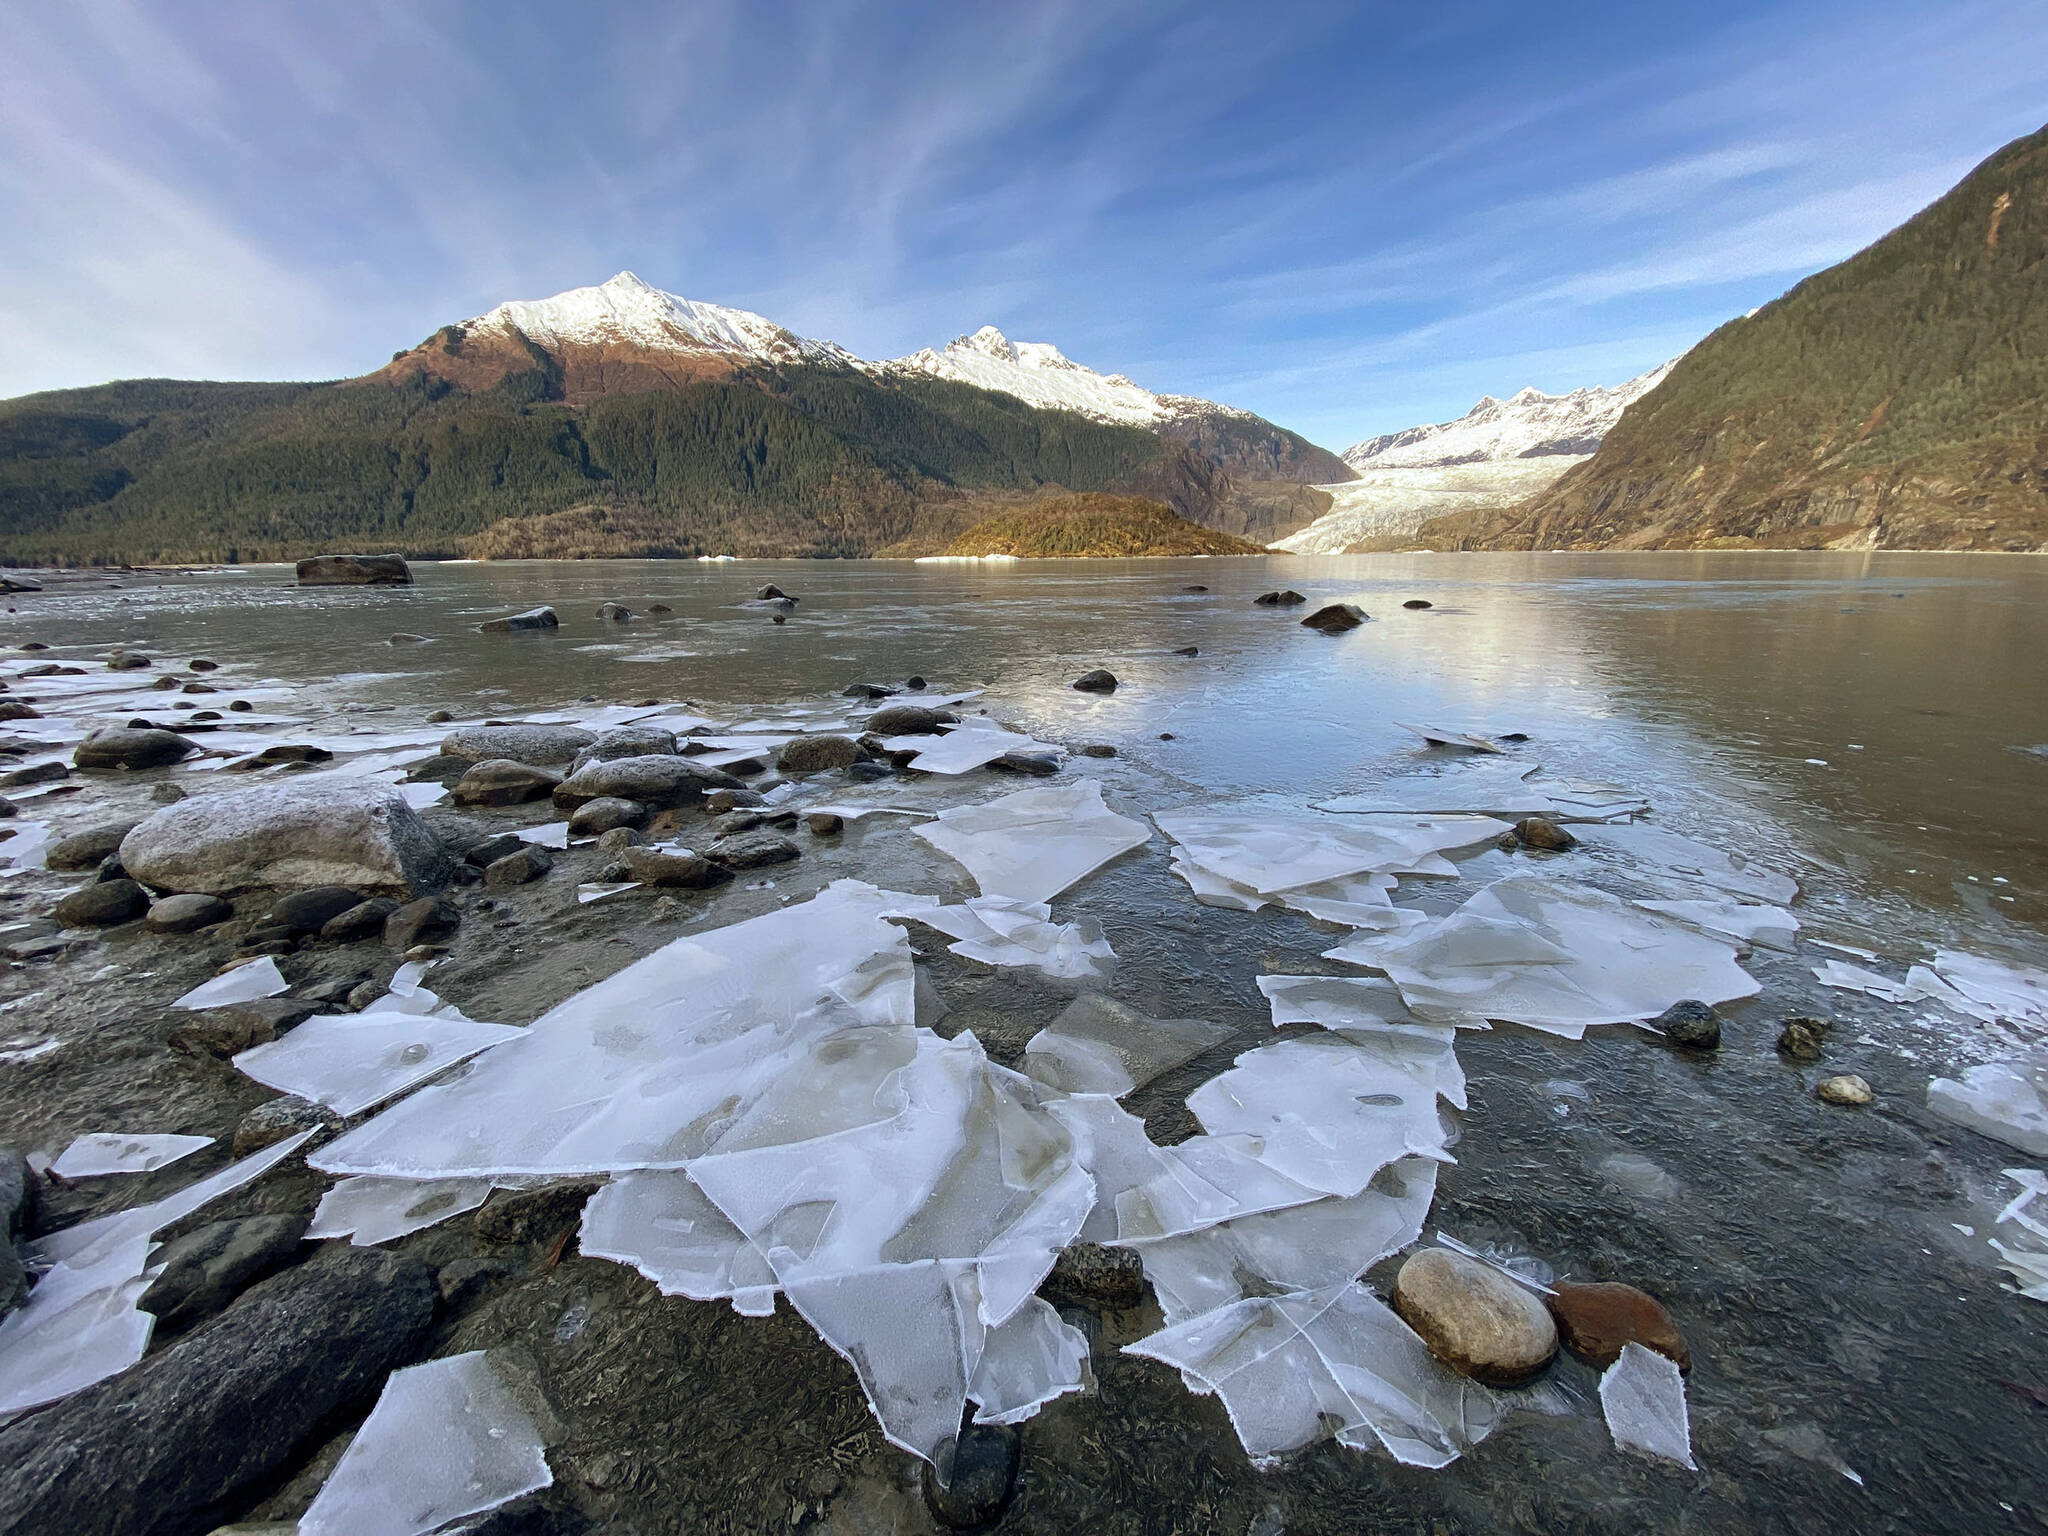 Thin ice sheets form near the Mendenhall Glacier in early November. (Courtesy Photo / Kenneth Gill, gillfoto)